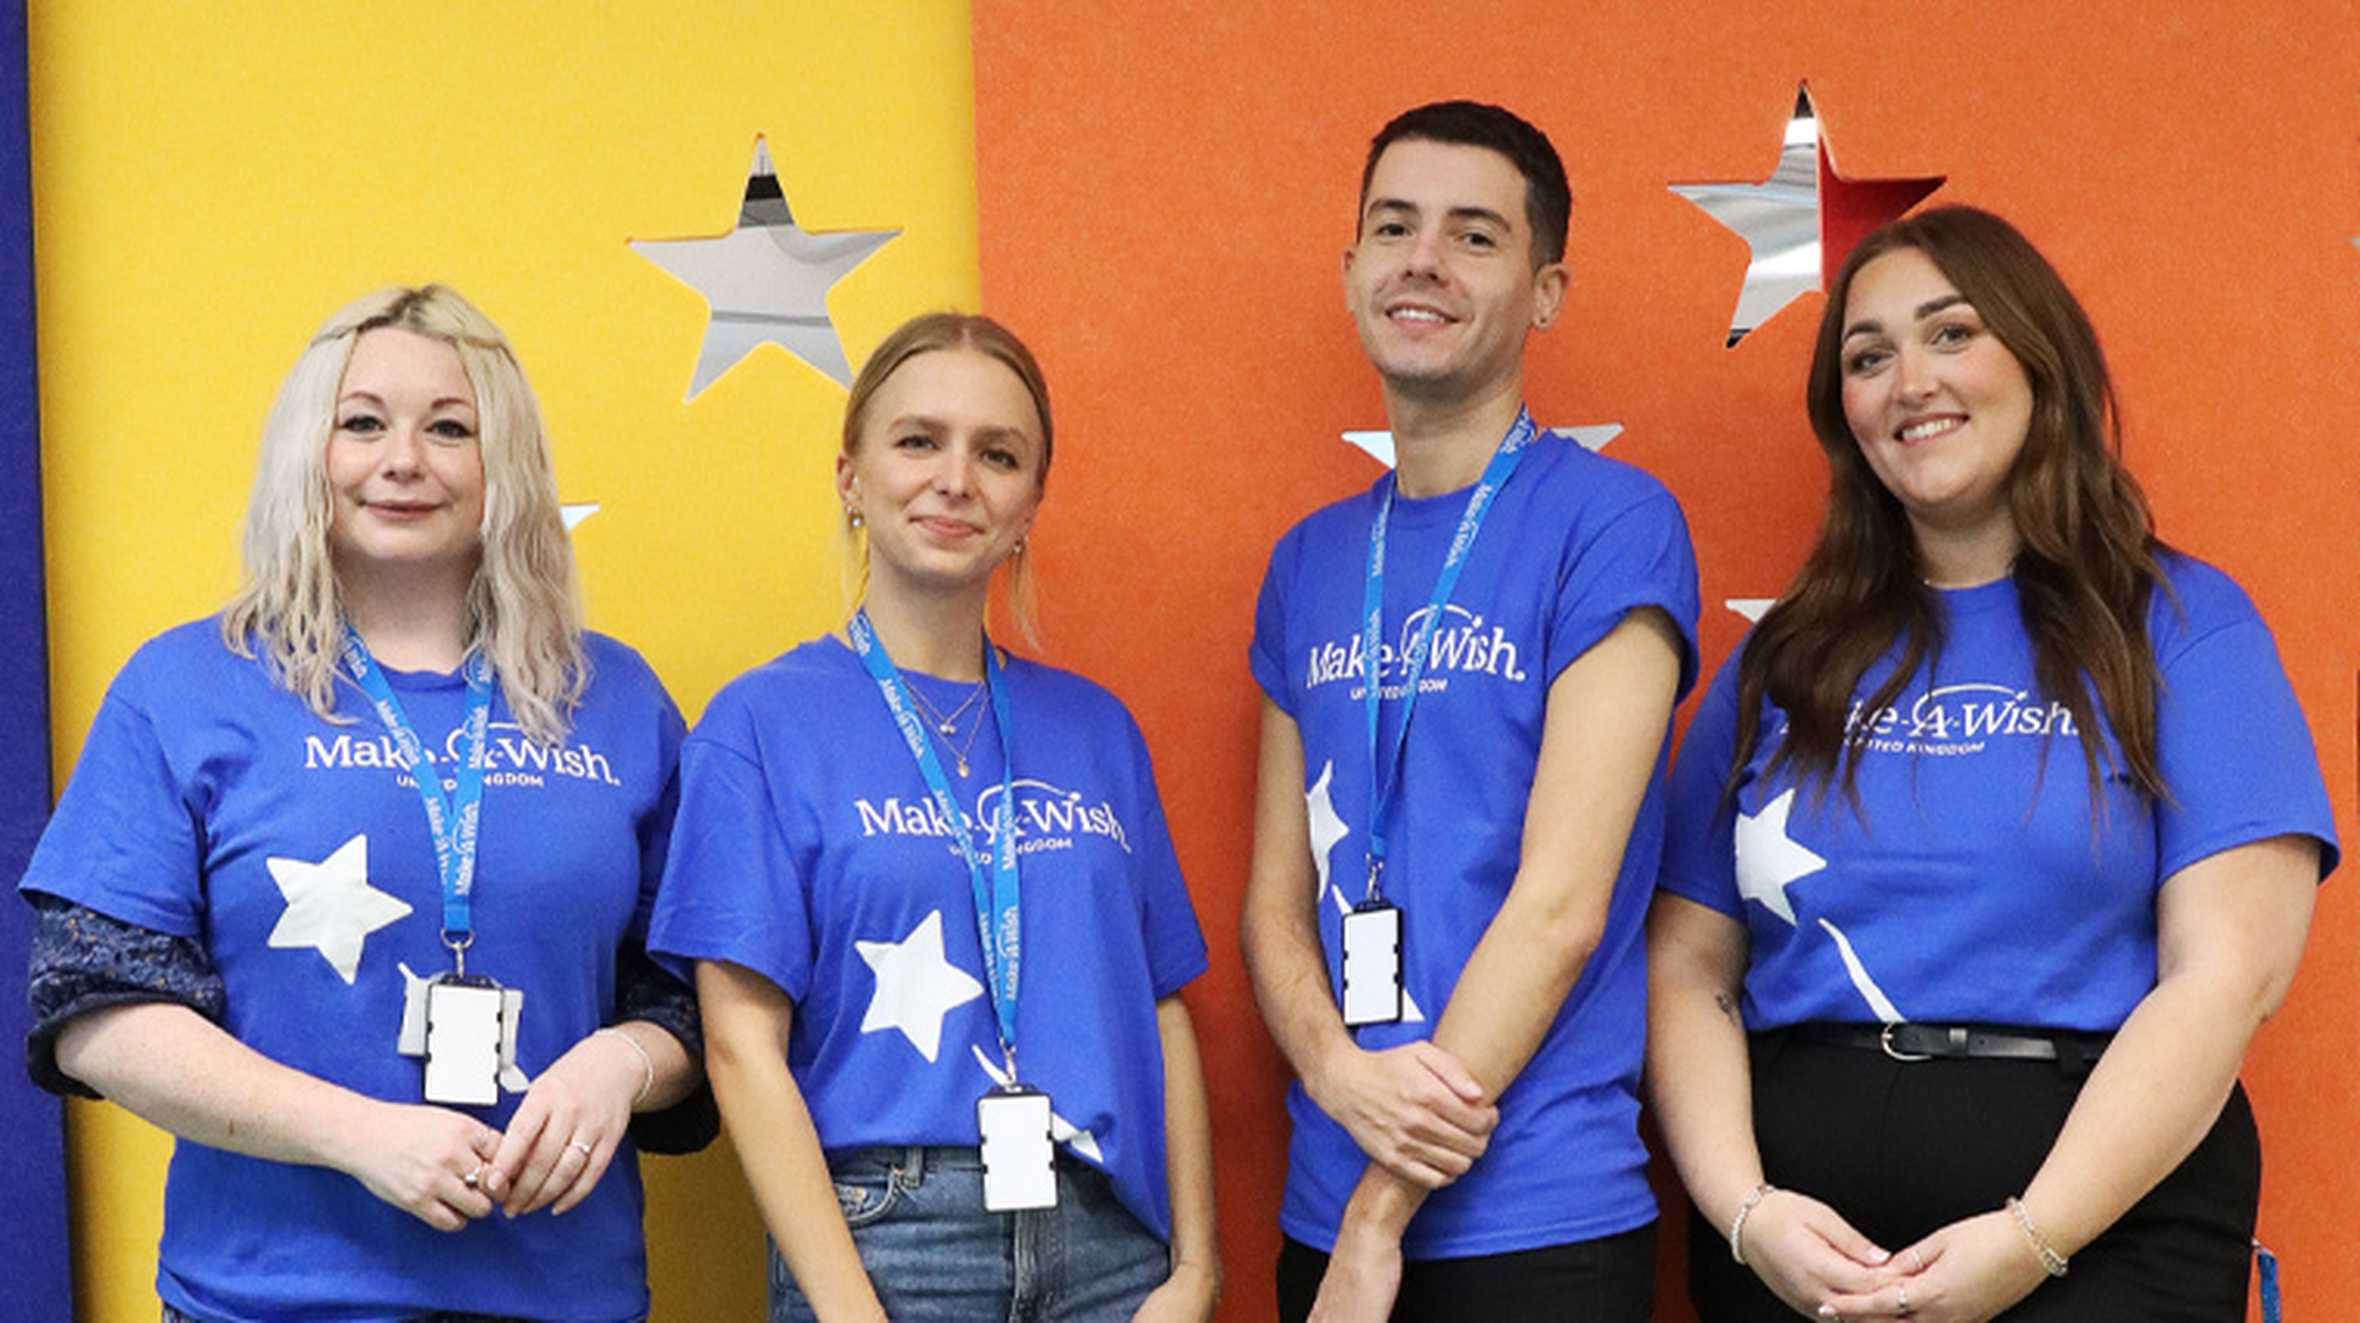 The Make-A-Wish Community Fundraising Team standing in front of a colourful background in Make-A-Wish UK's Reading hub.